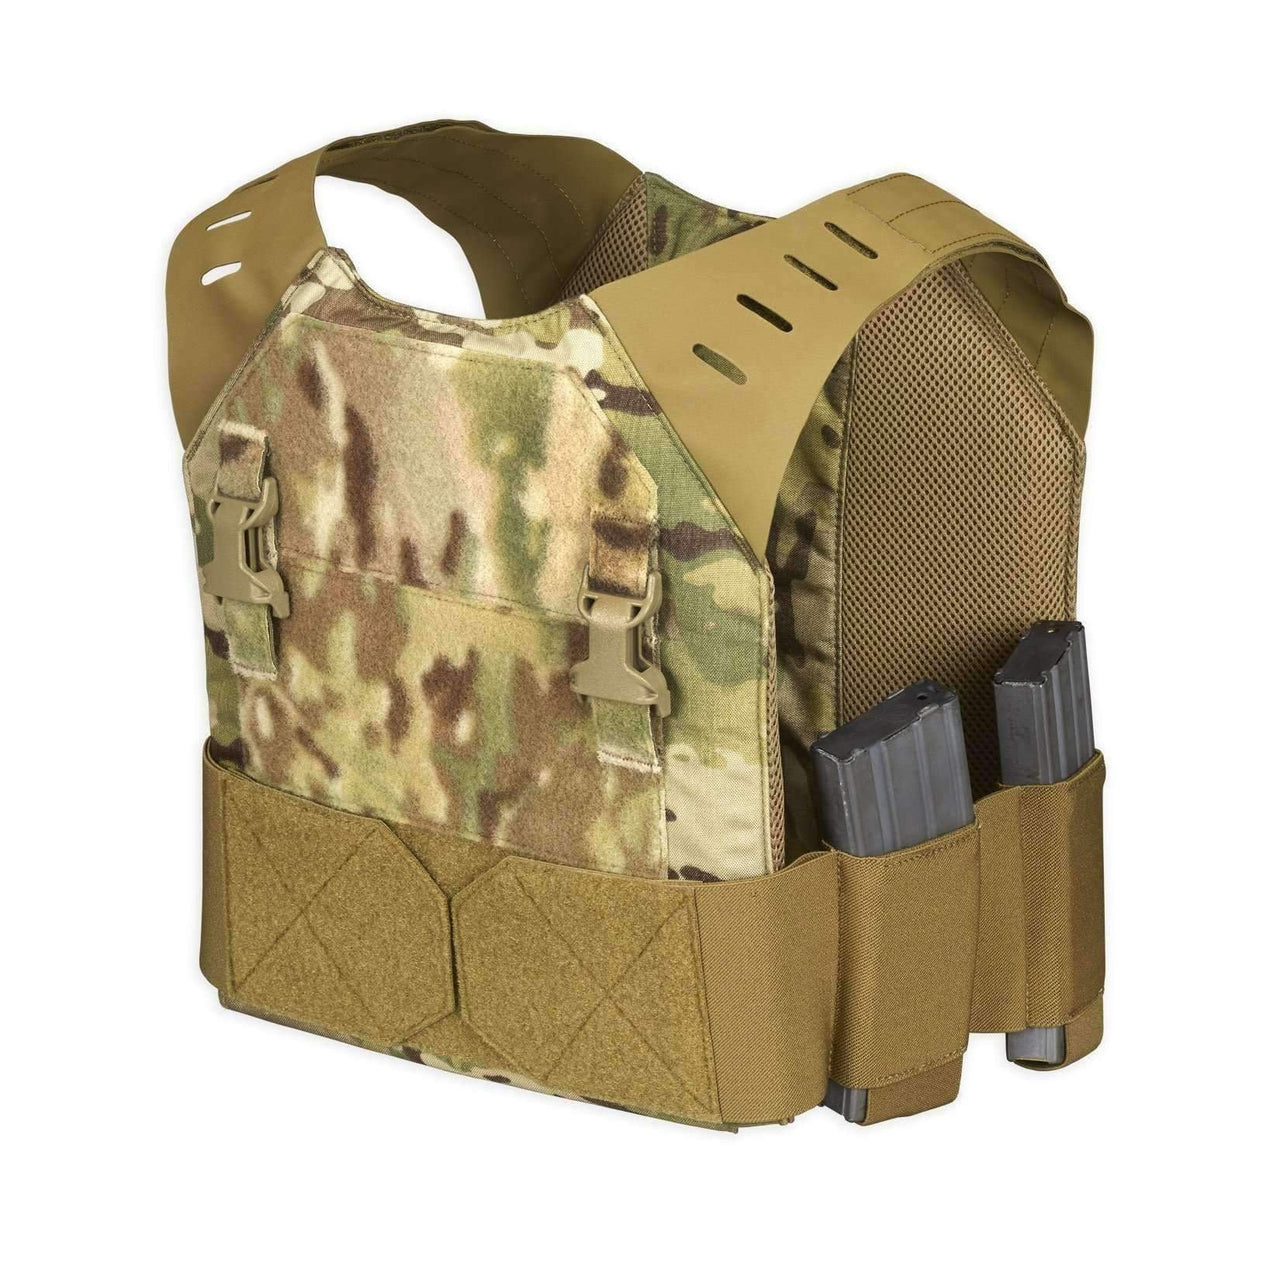 Chase Tactical Special Operations Concealable Plate Carrier - SOCC - MED-TAC International Corp. - Chase Tactical